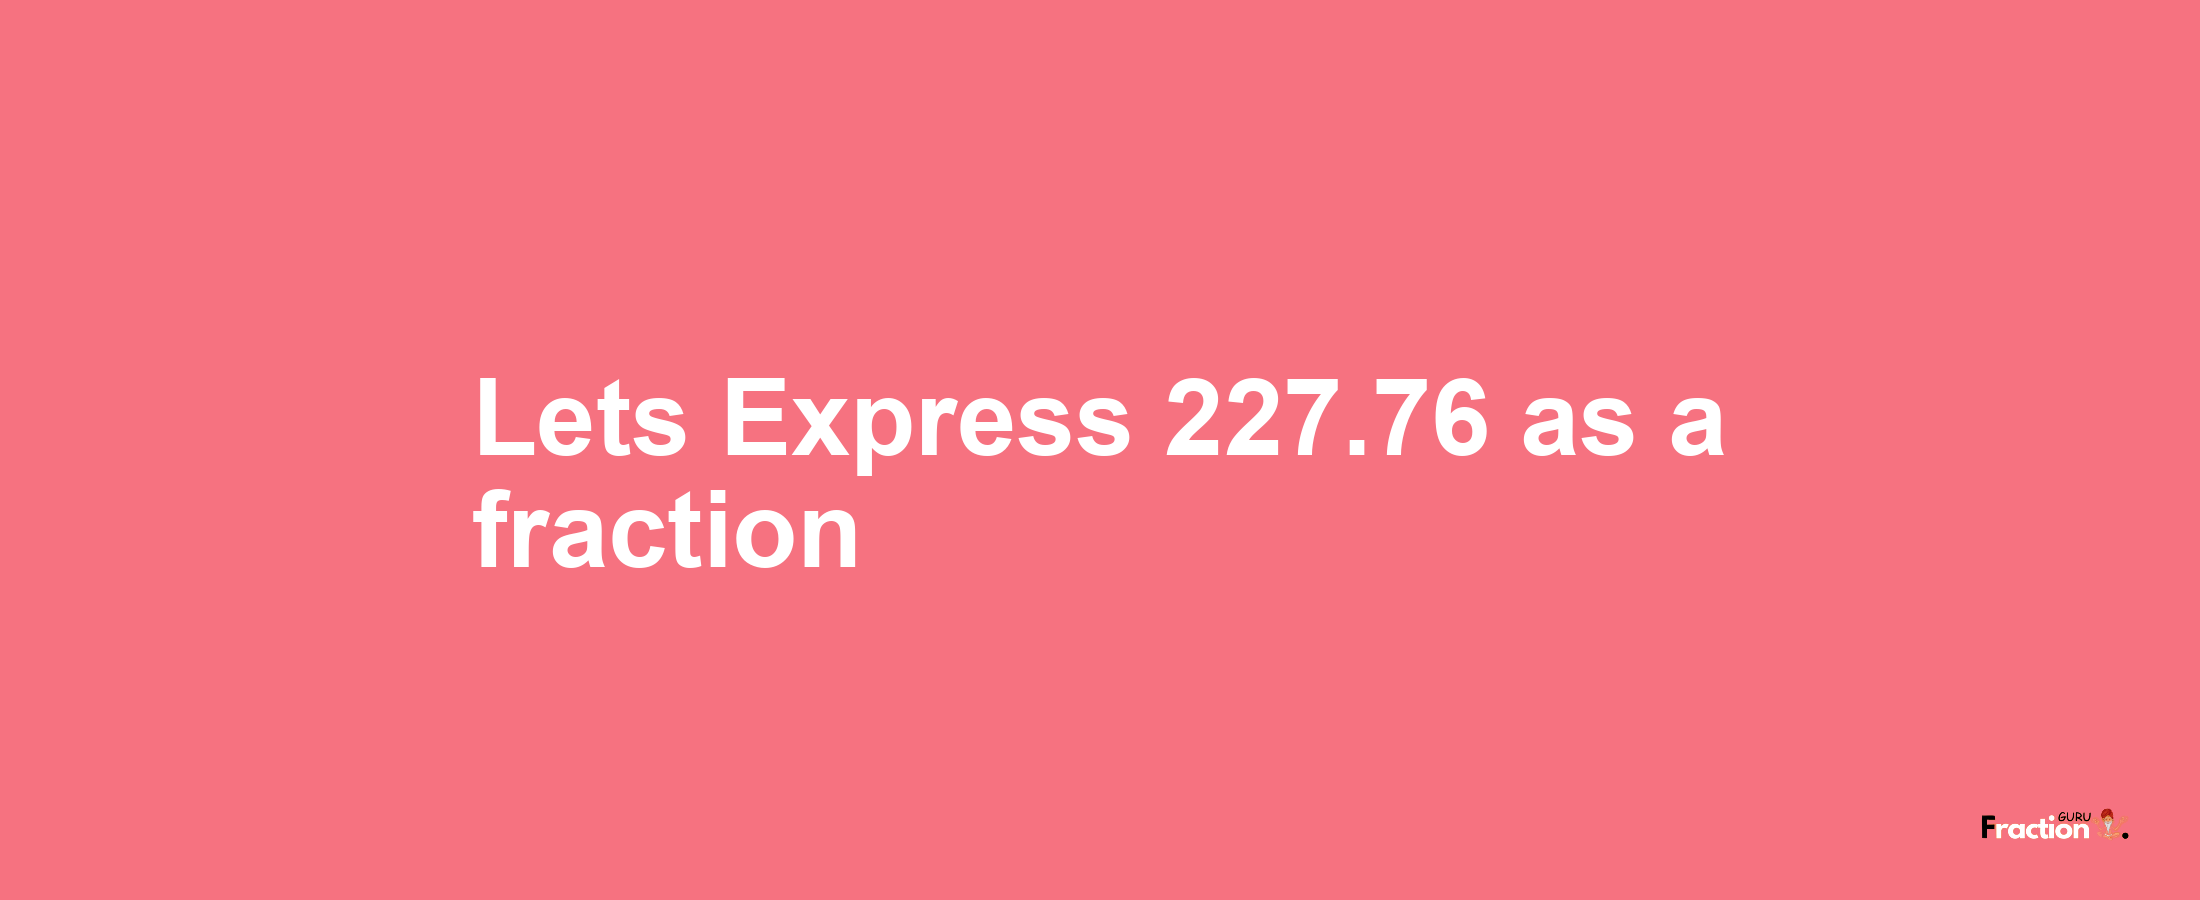 Lets Express 227.76 as afraction